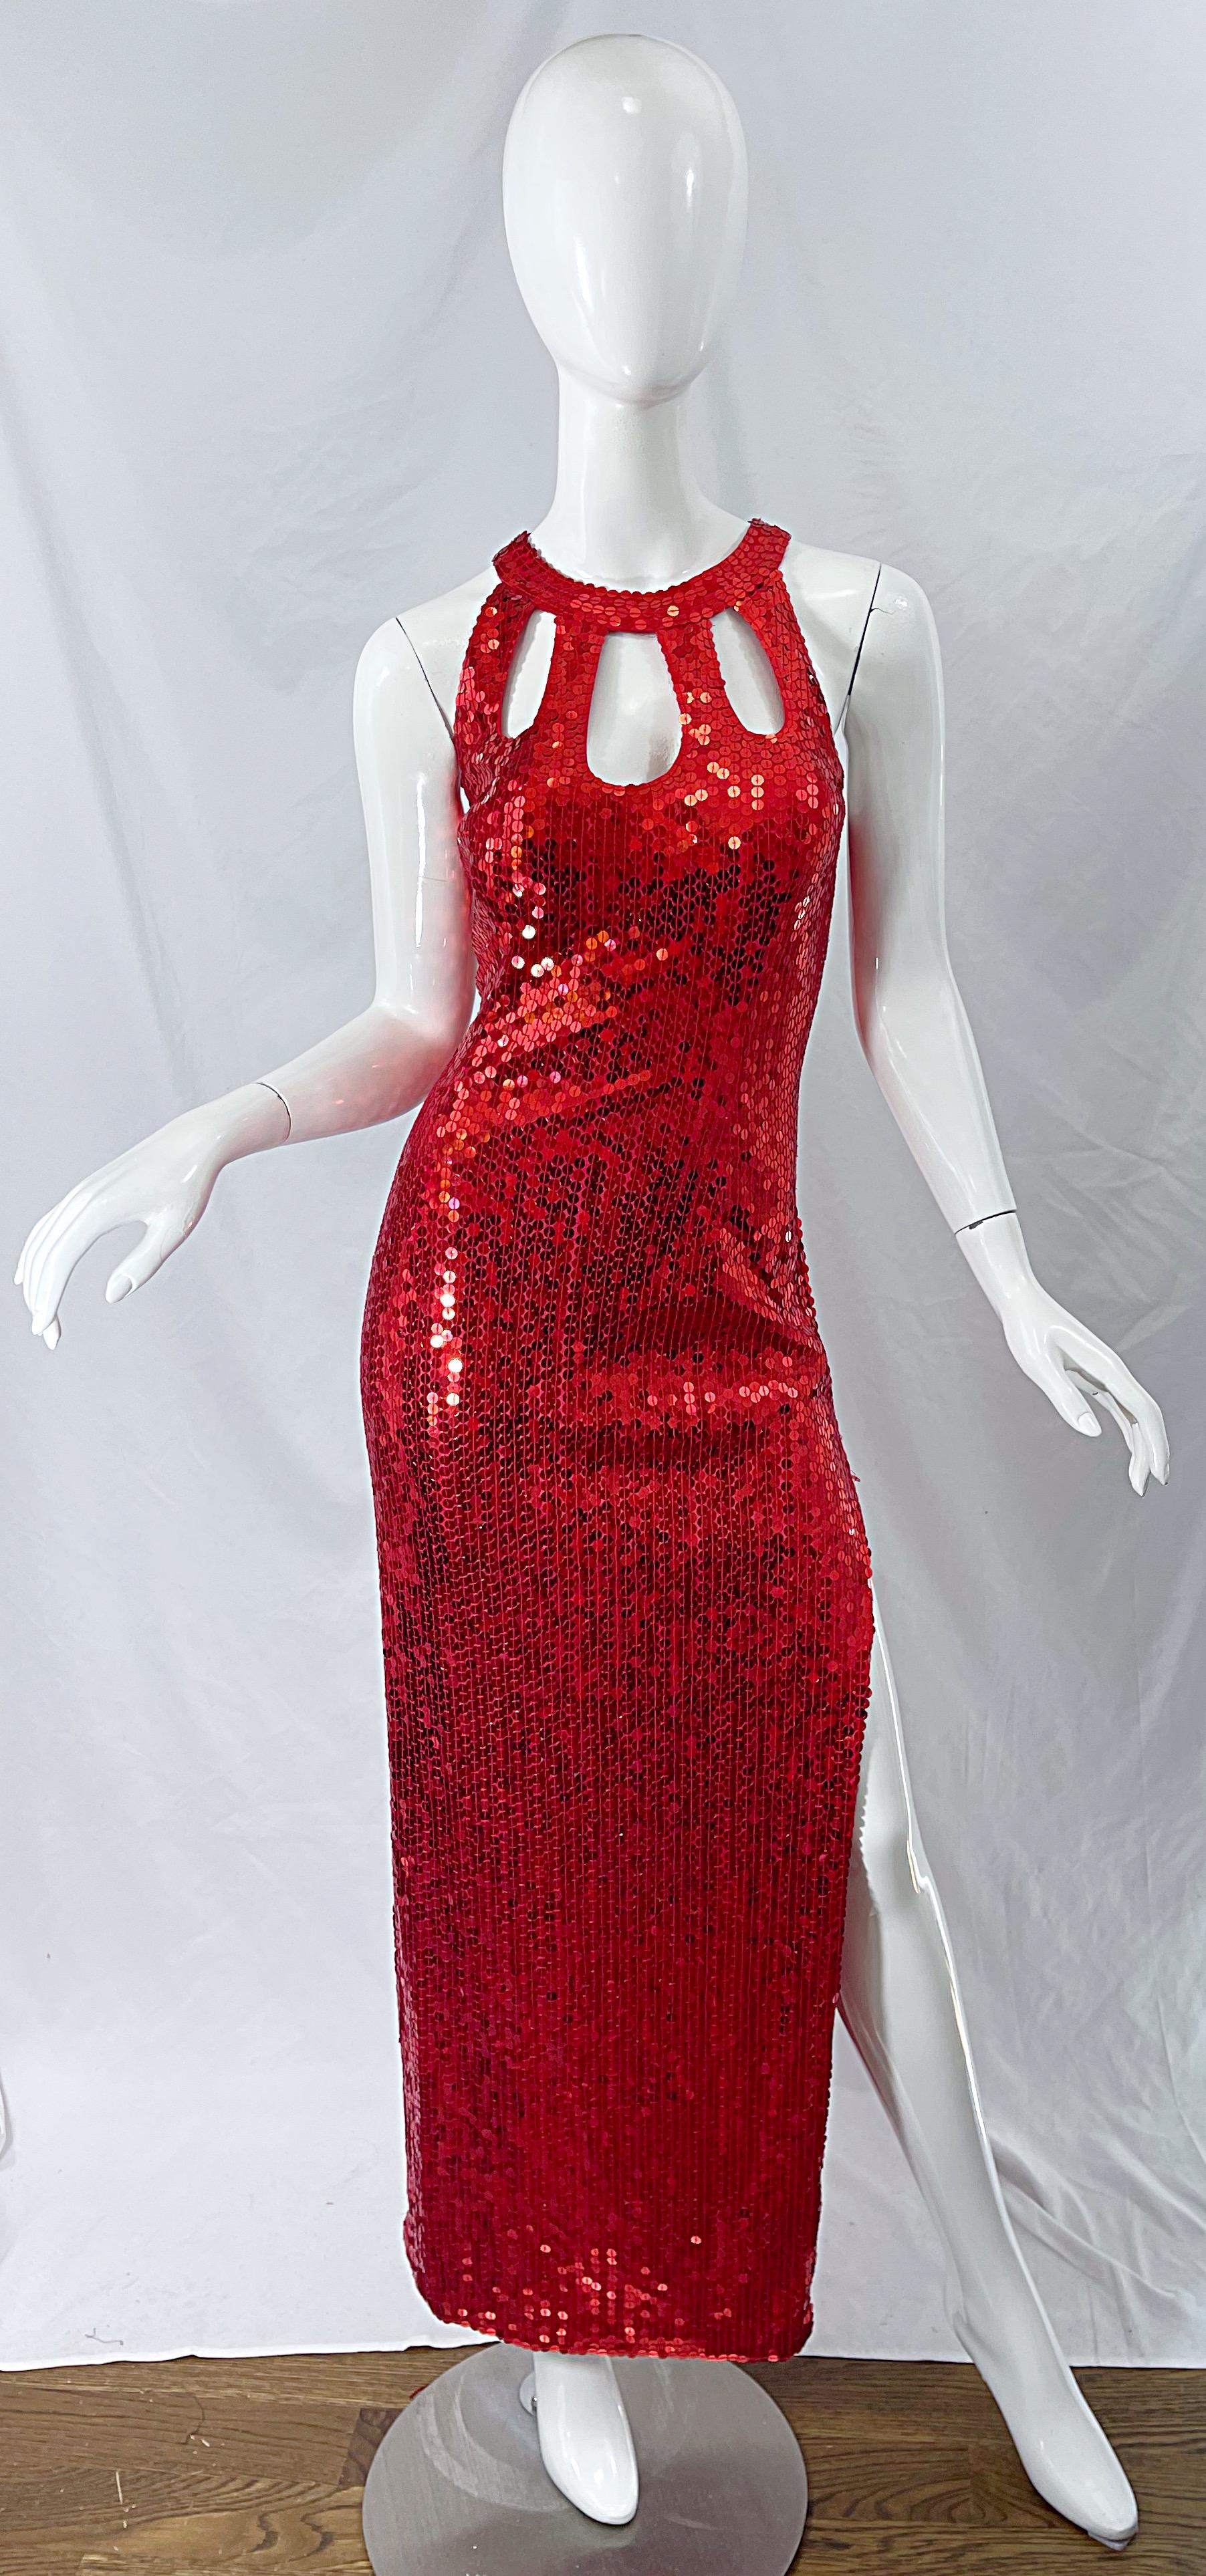 Sexy vintage 90s cut-out fully sequined lipstick red evening gown ! Features thousands of hand-sewn red sequins throughout. Cut-out details above the bust. Thigh high slit up the left leg. Hidden zipper up the back with hook-and-eye closure. 
In